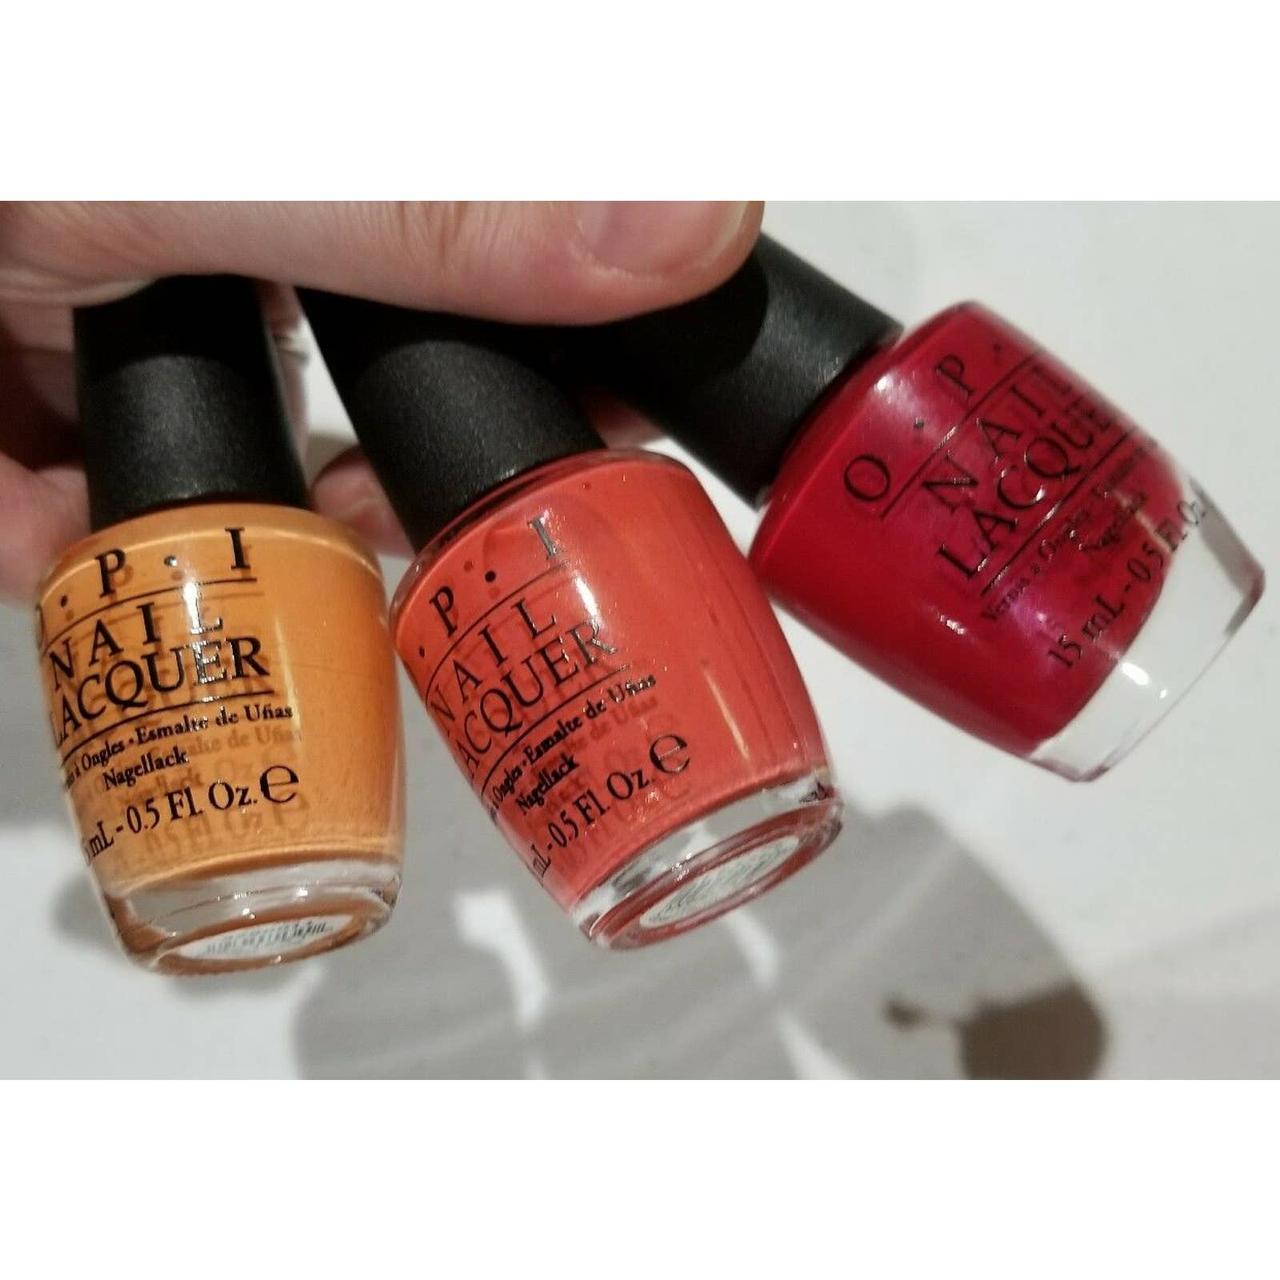 Product Image 1 - OPI Nail Polish lot:

Included are: